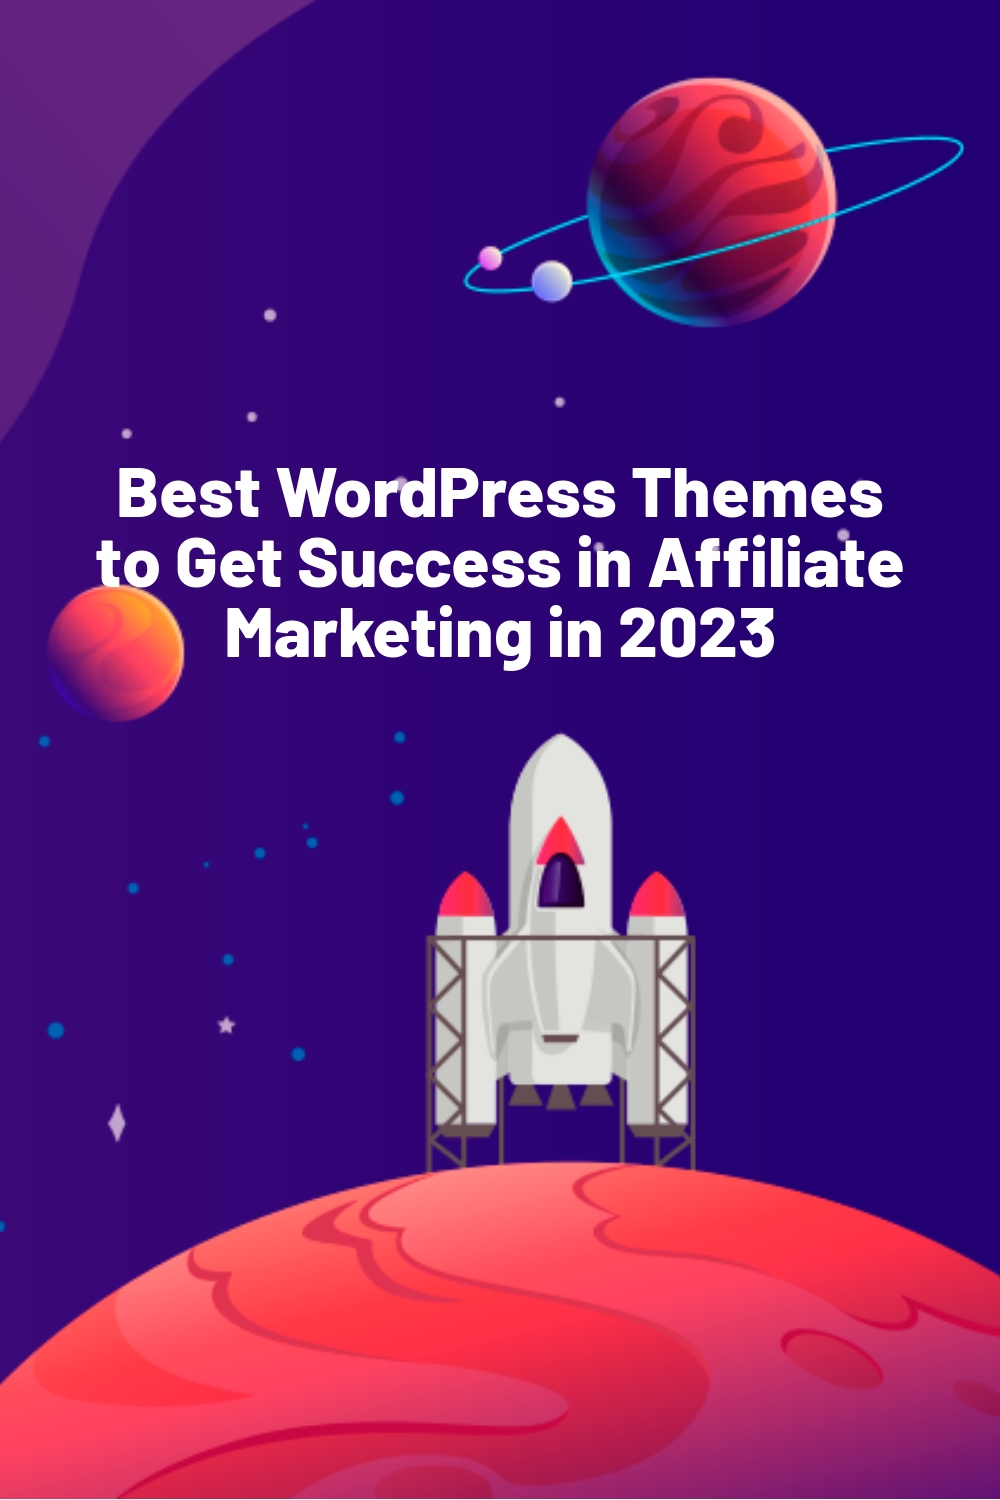 Best WordPress Themes to Get Success in Affiliate Marketing in 2023